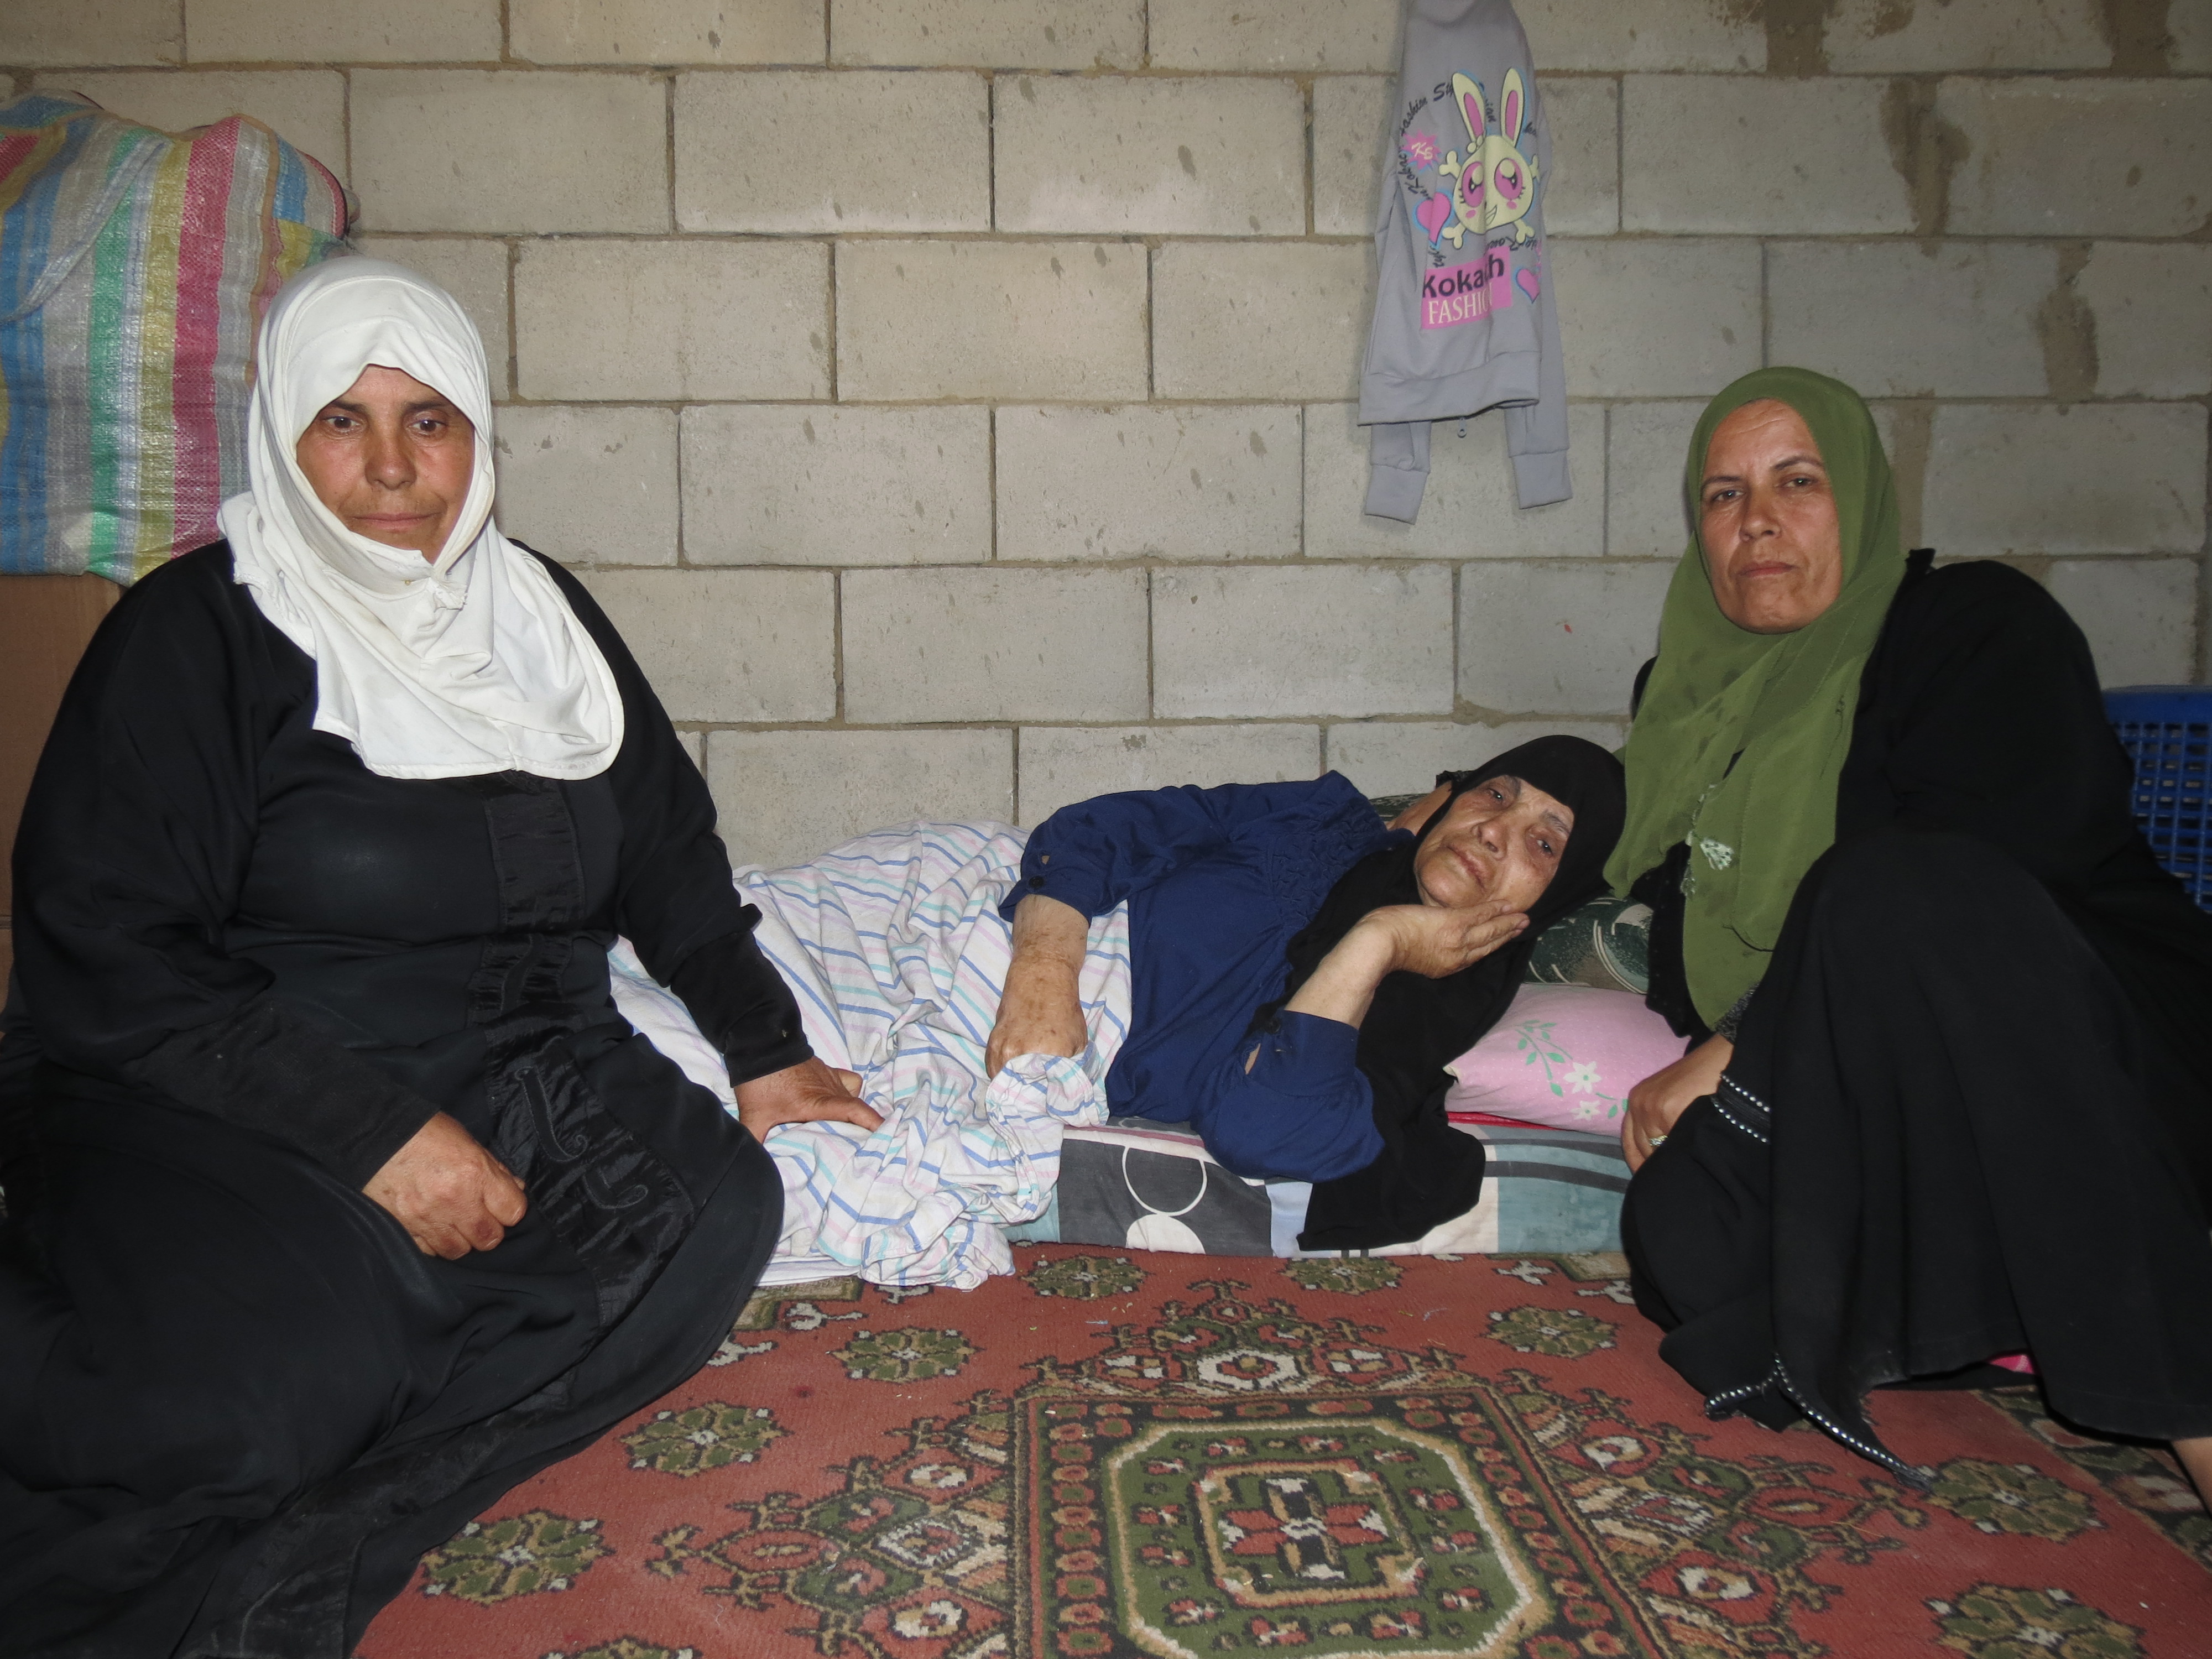 An older Syrian refugee is bed bound due to injuring her legs.